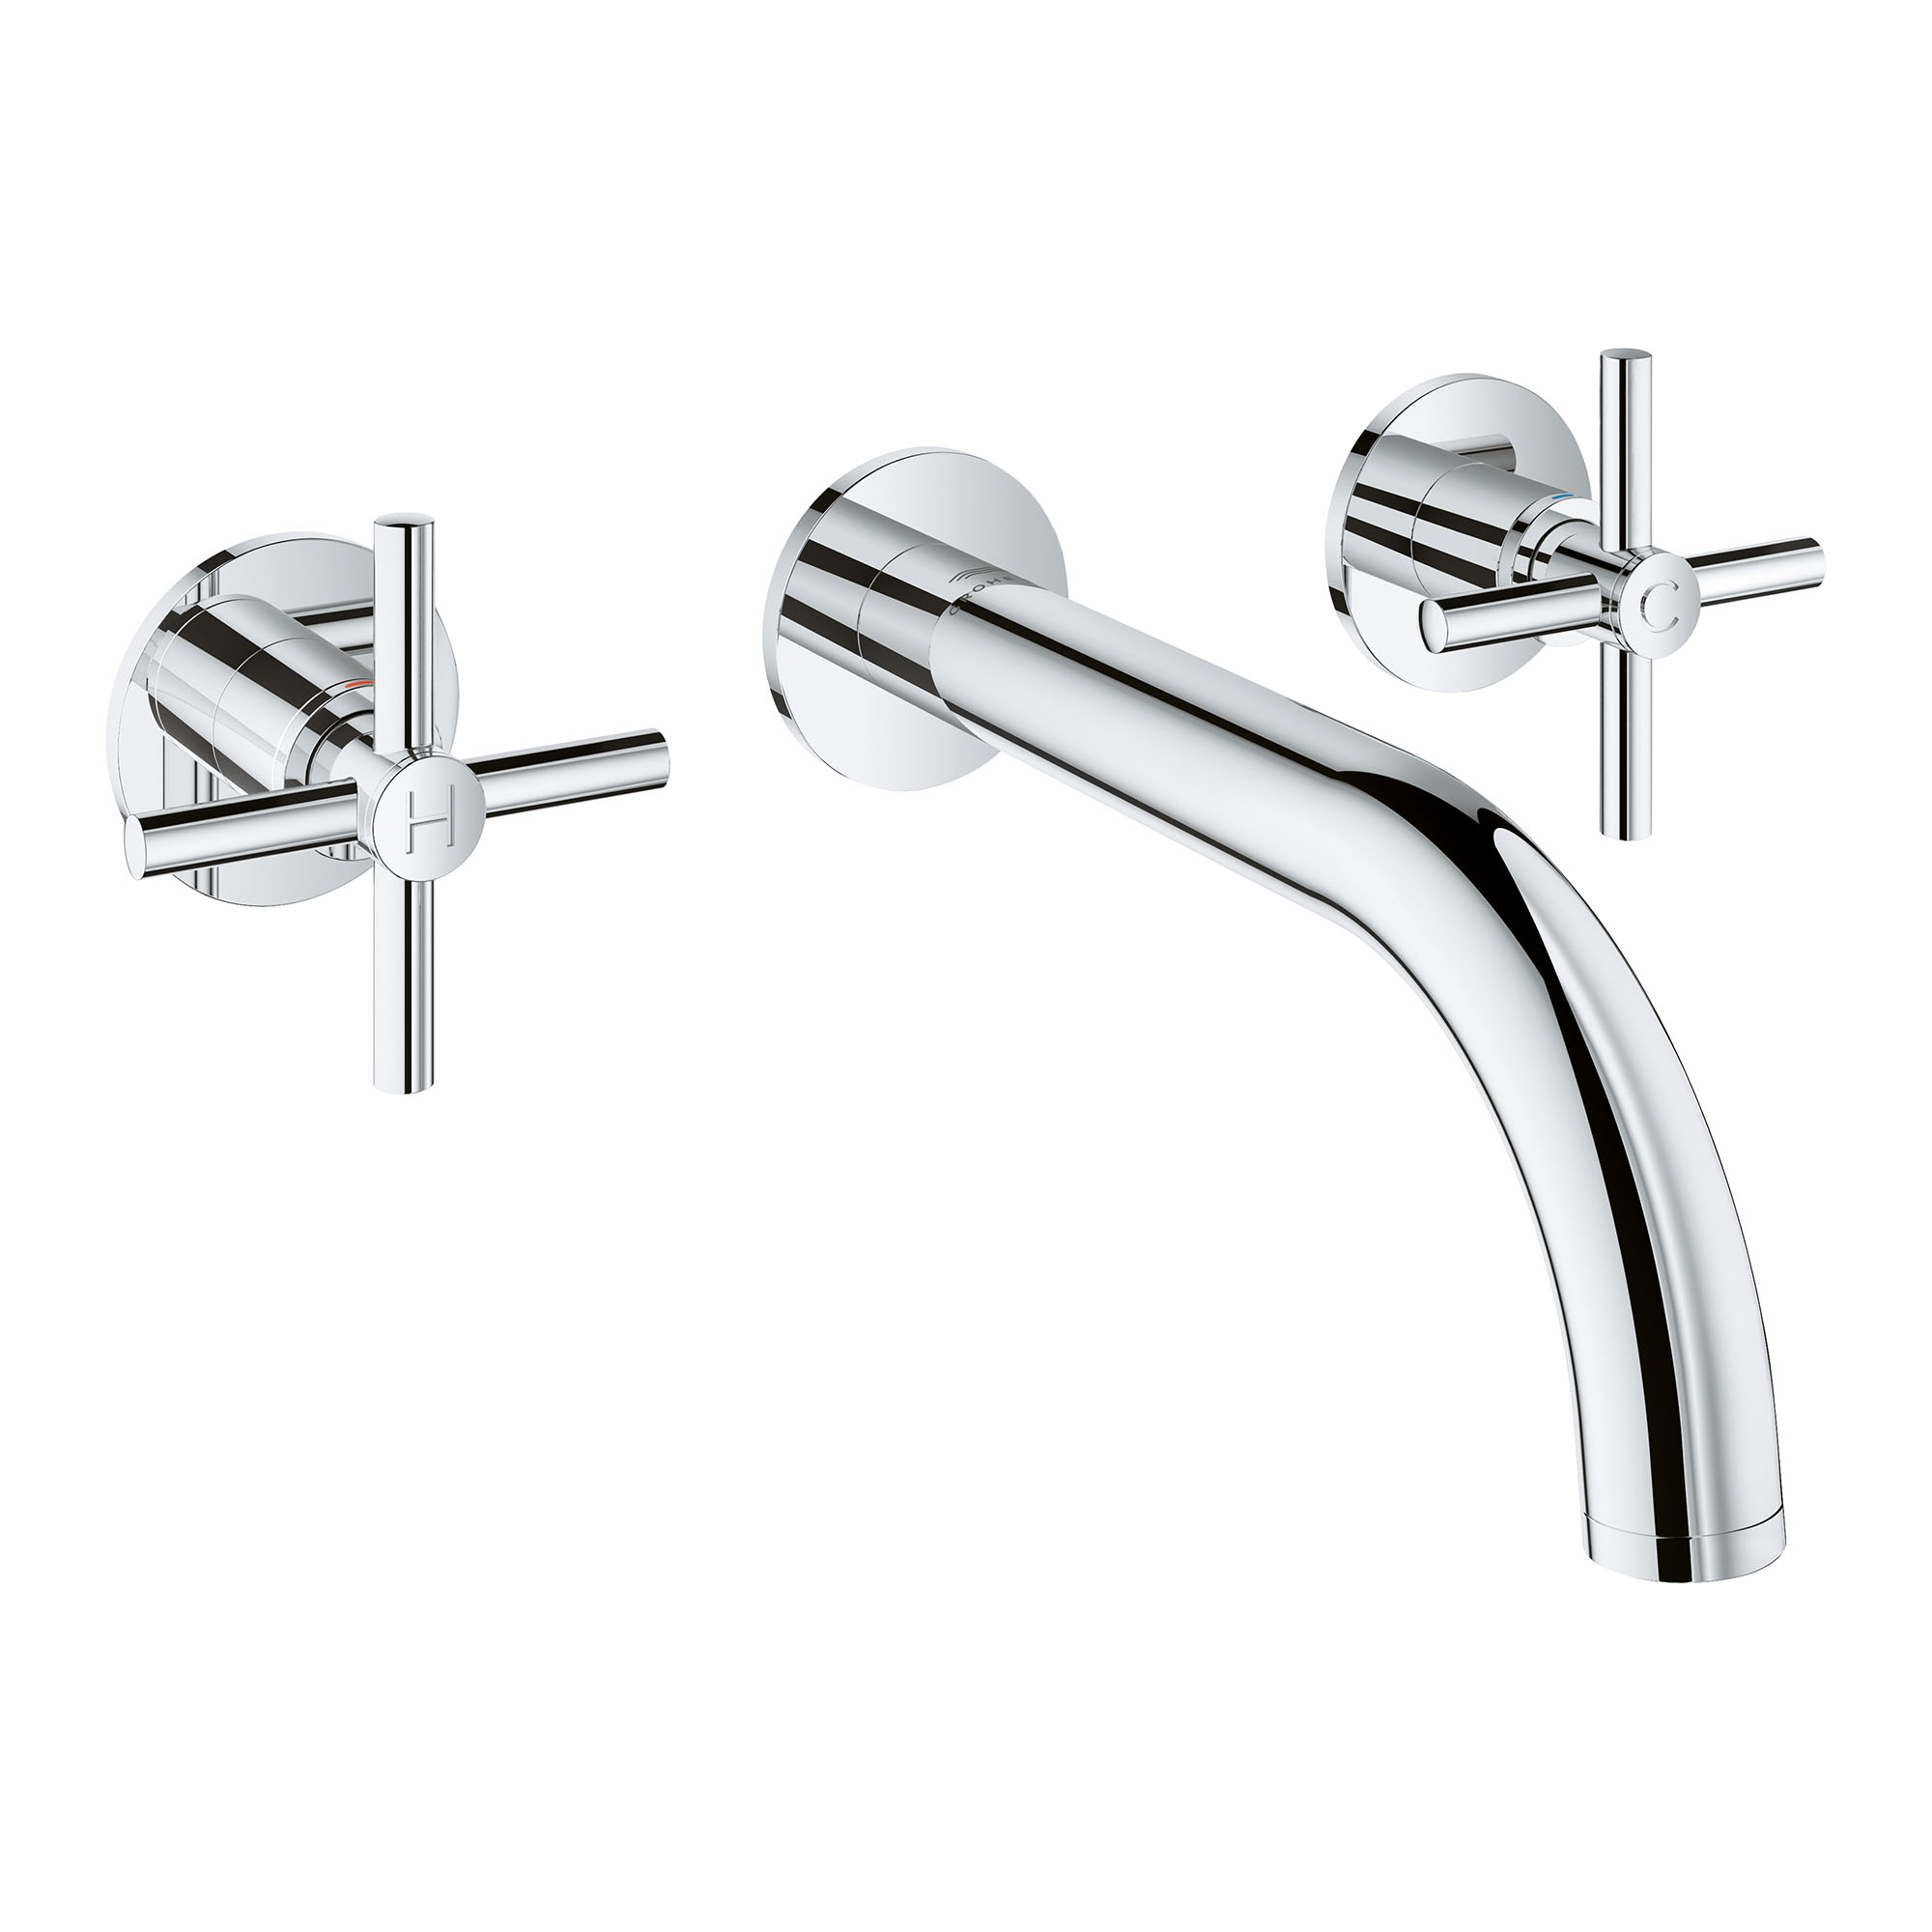 Atrio 2-Handle Wall Mount Faucet, 1.2 GPM (4.5 L/min)